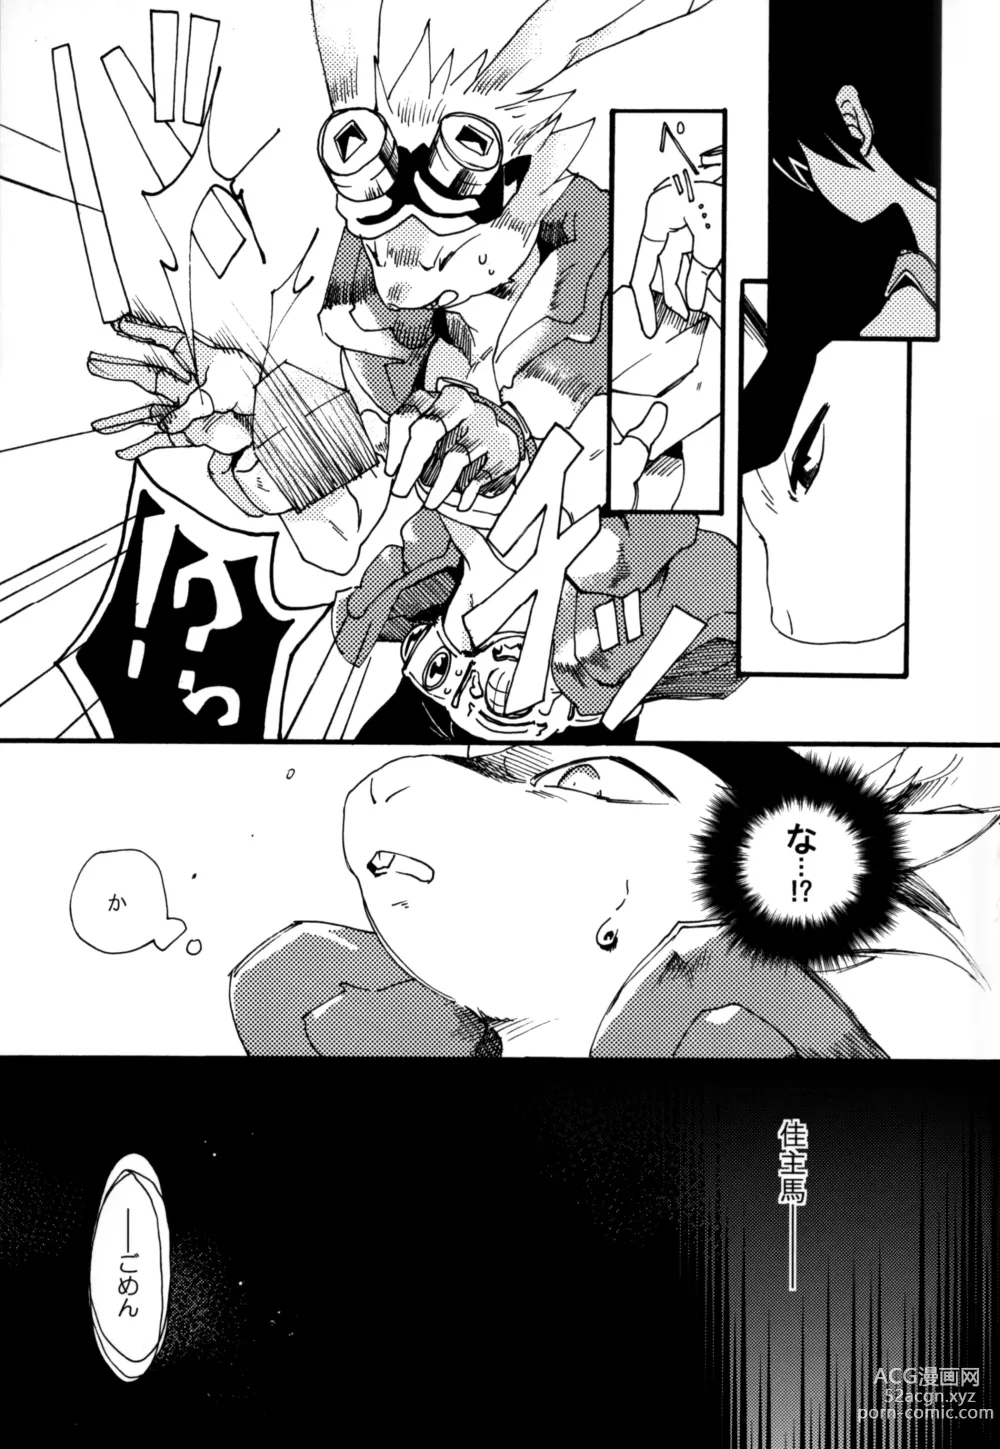 Page 6 of doujinshi Lost.K